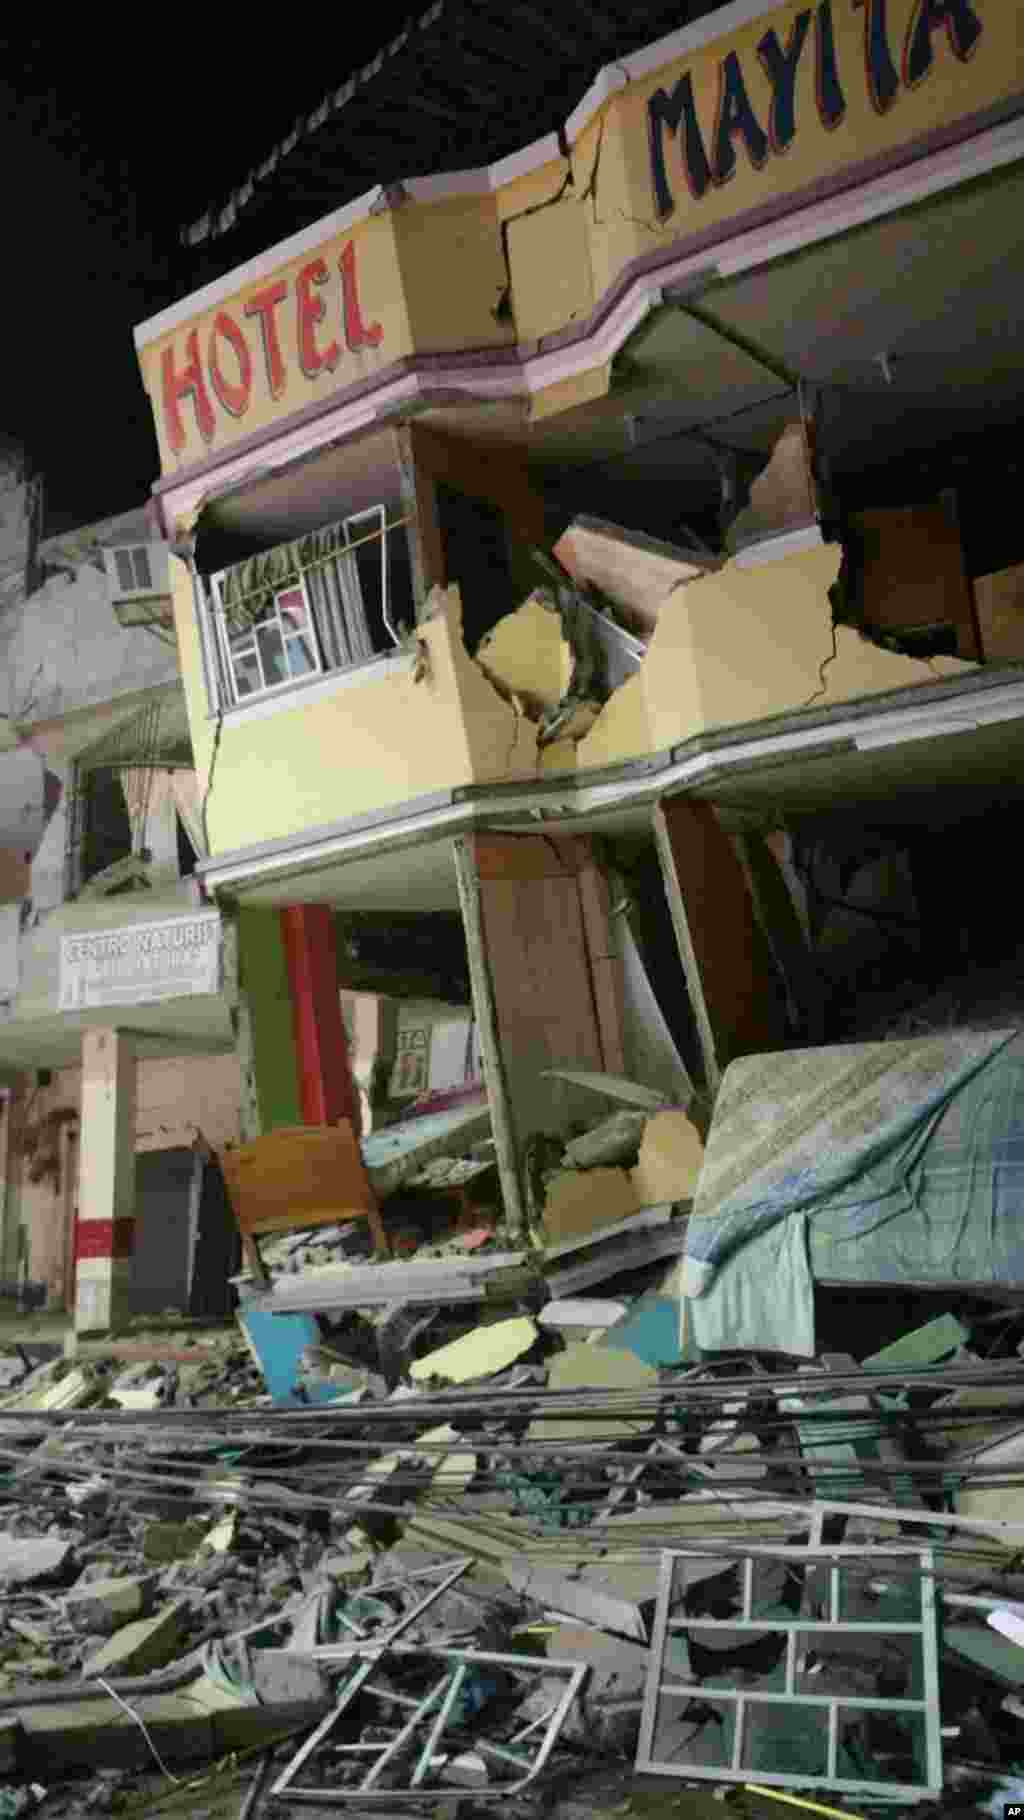 An hotel barely stands after an earthquake in the town of Manta, Ecuador, April 16, 2016.